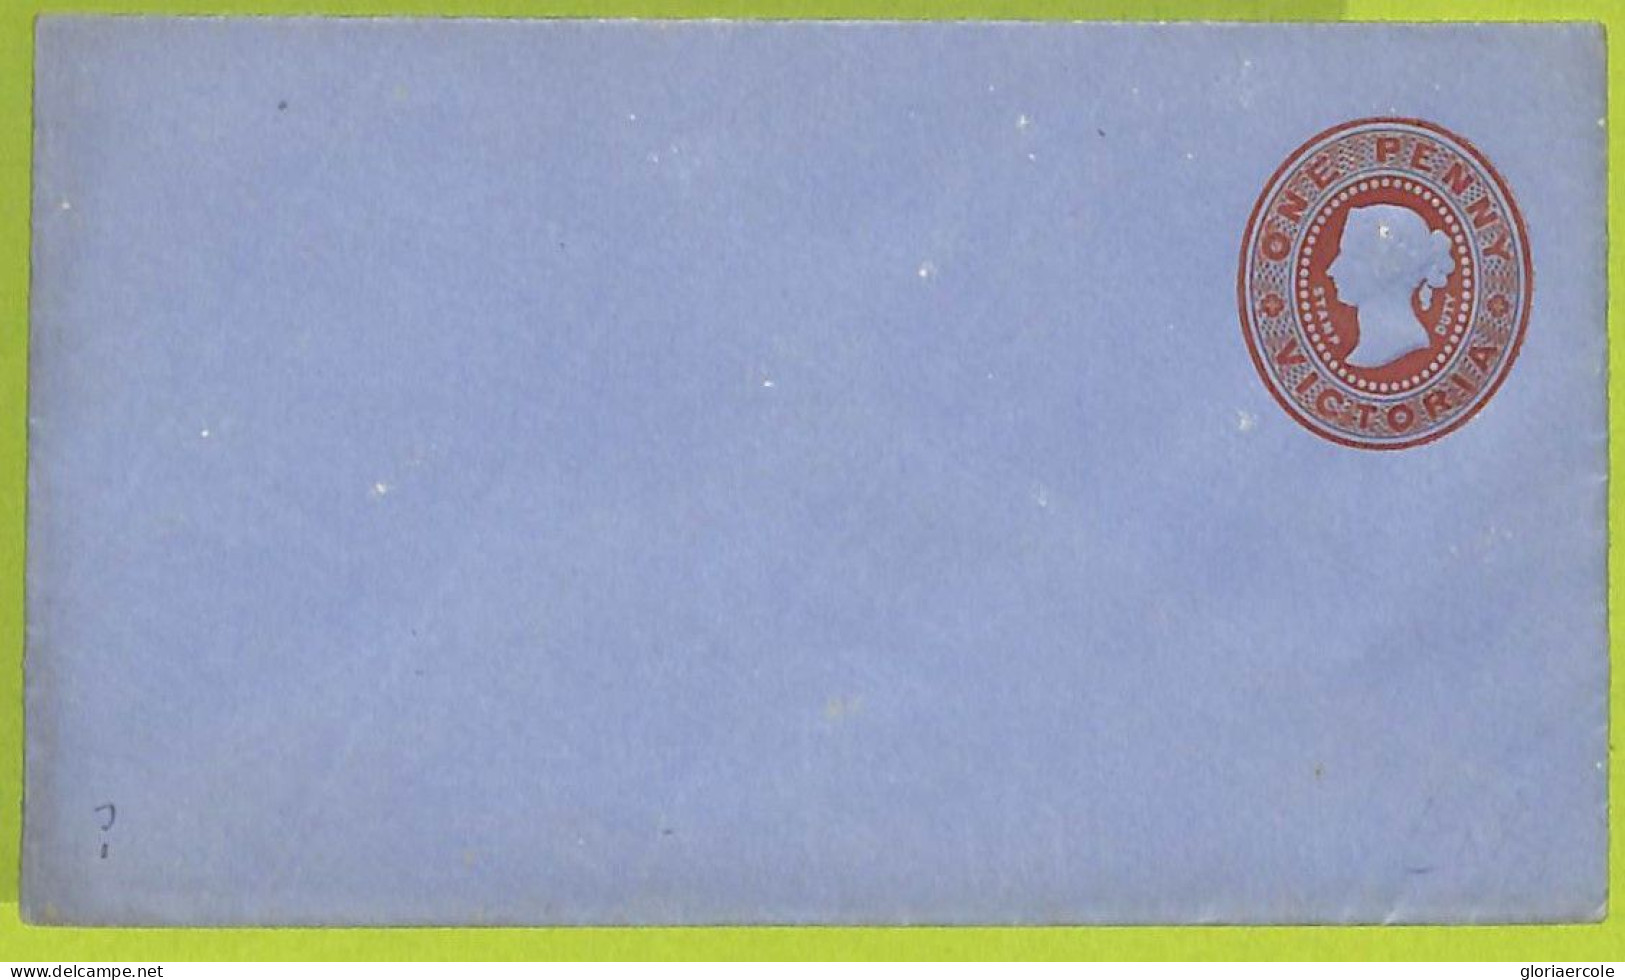 40206 - VICTORIA - Postal History - STATIONERY COVER Printed To Order BLUE LAID PAPER 1 P - 136*78 - Lettres & Documents